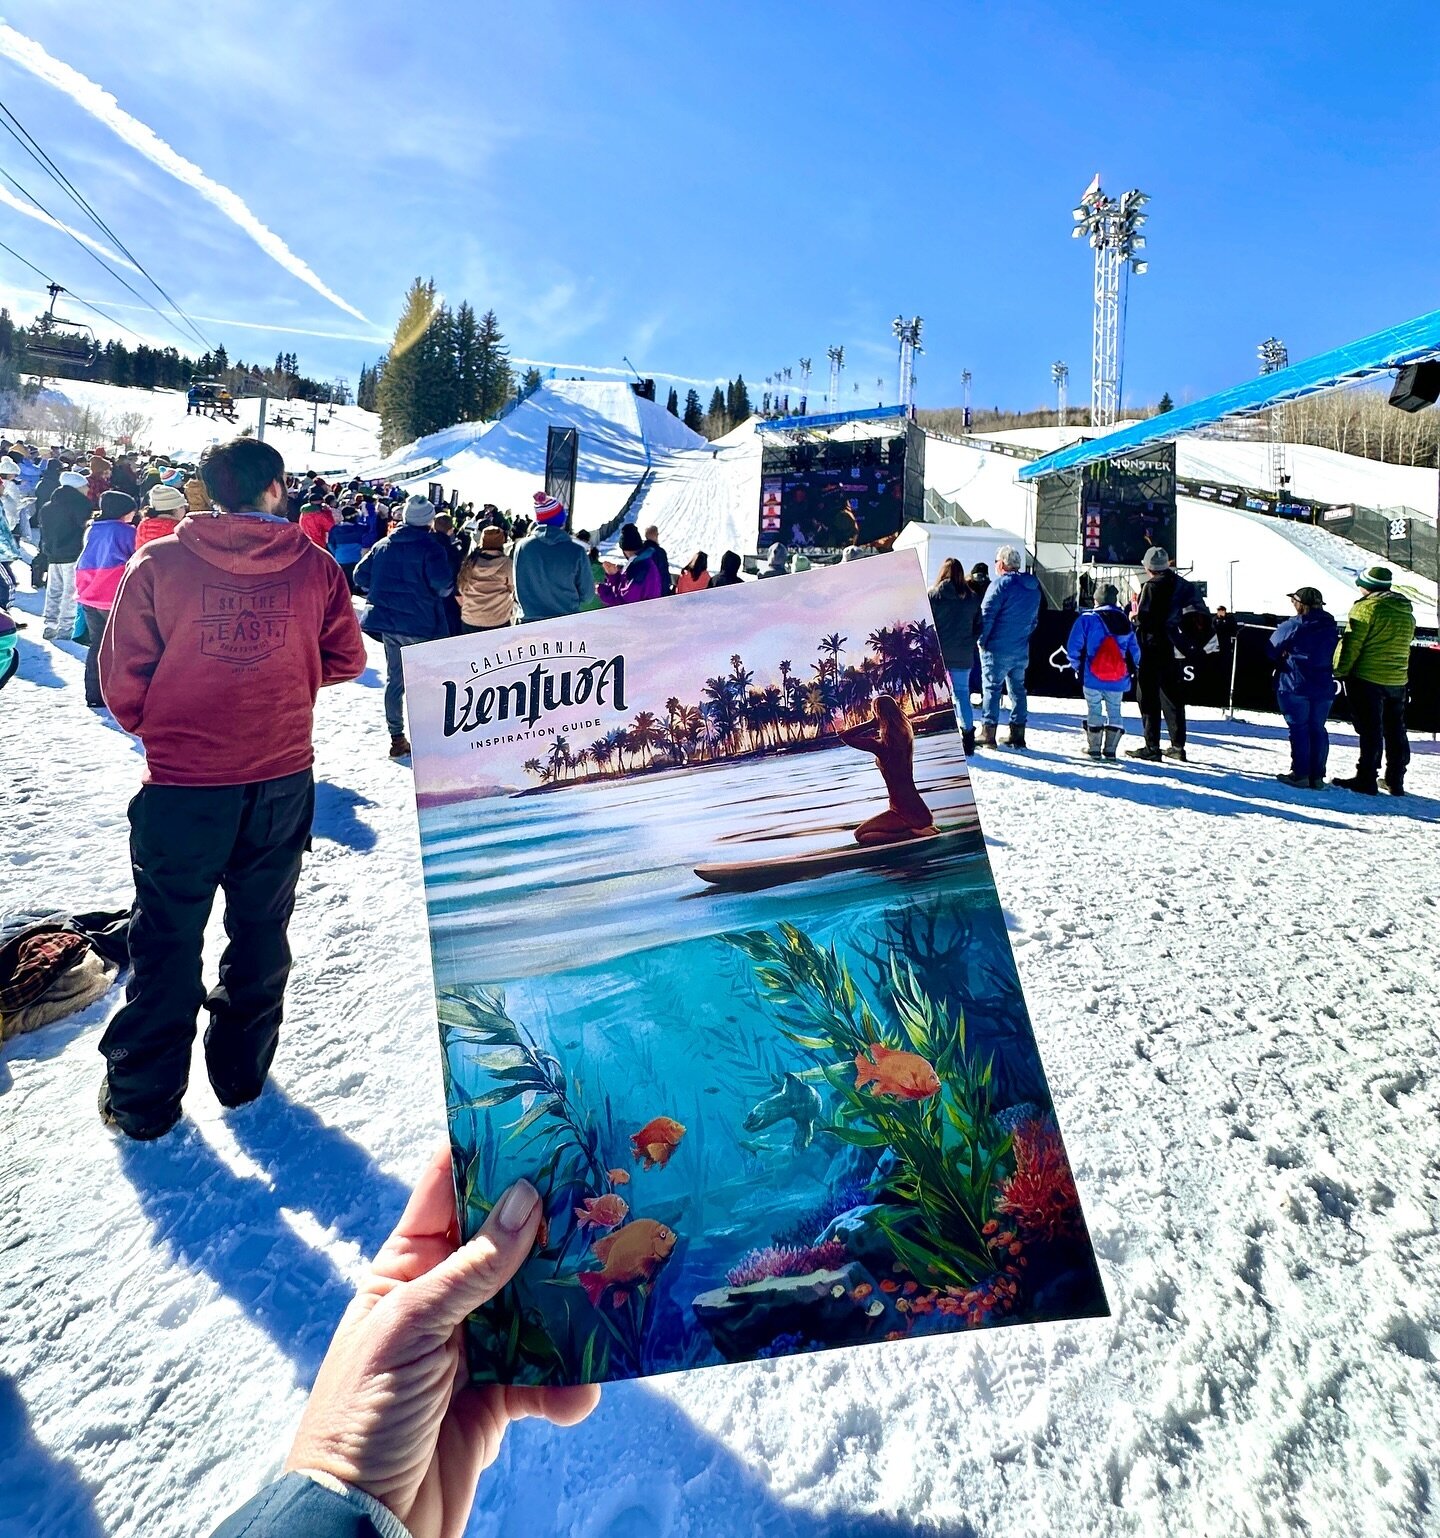 The Summer @xgames are coming back to Ventura this June, and we&rsquo;re thrilled for our friends at @visitventura to have this epic event return 💥 Thanks to @marlyss95 for snapping this pic of the 2024 Inspiration Guide against a snowy background a